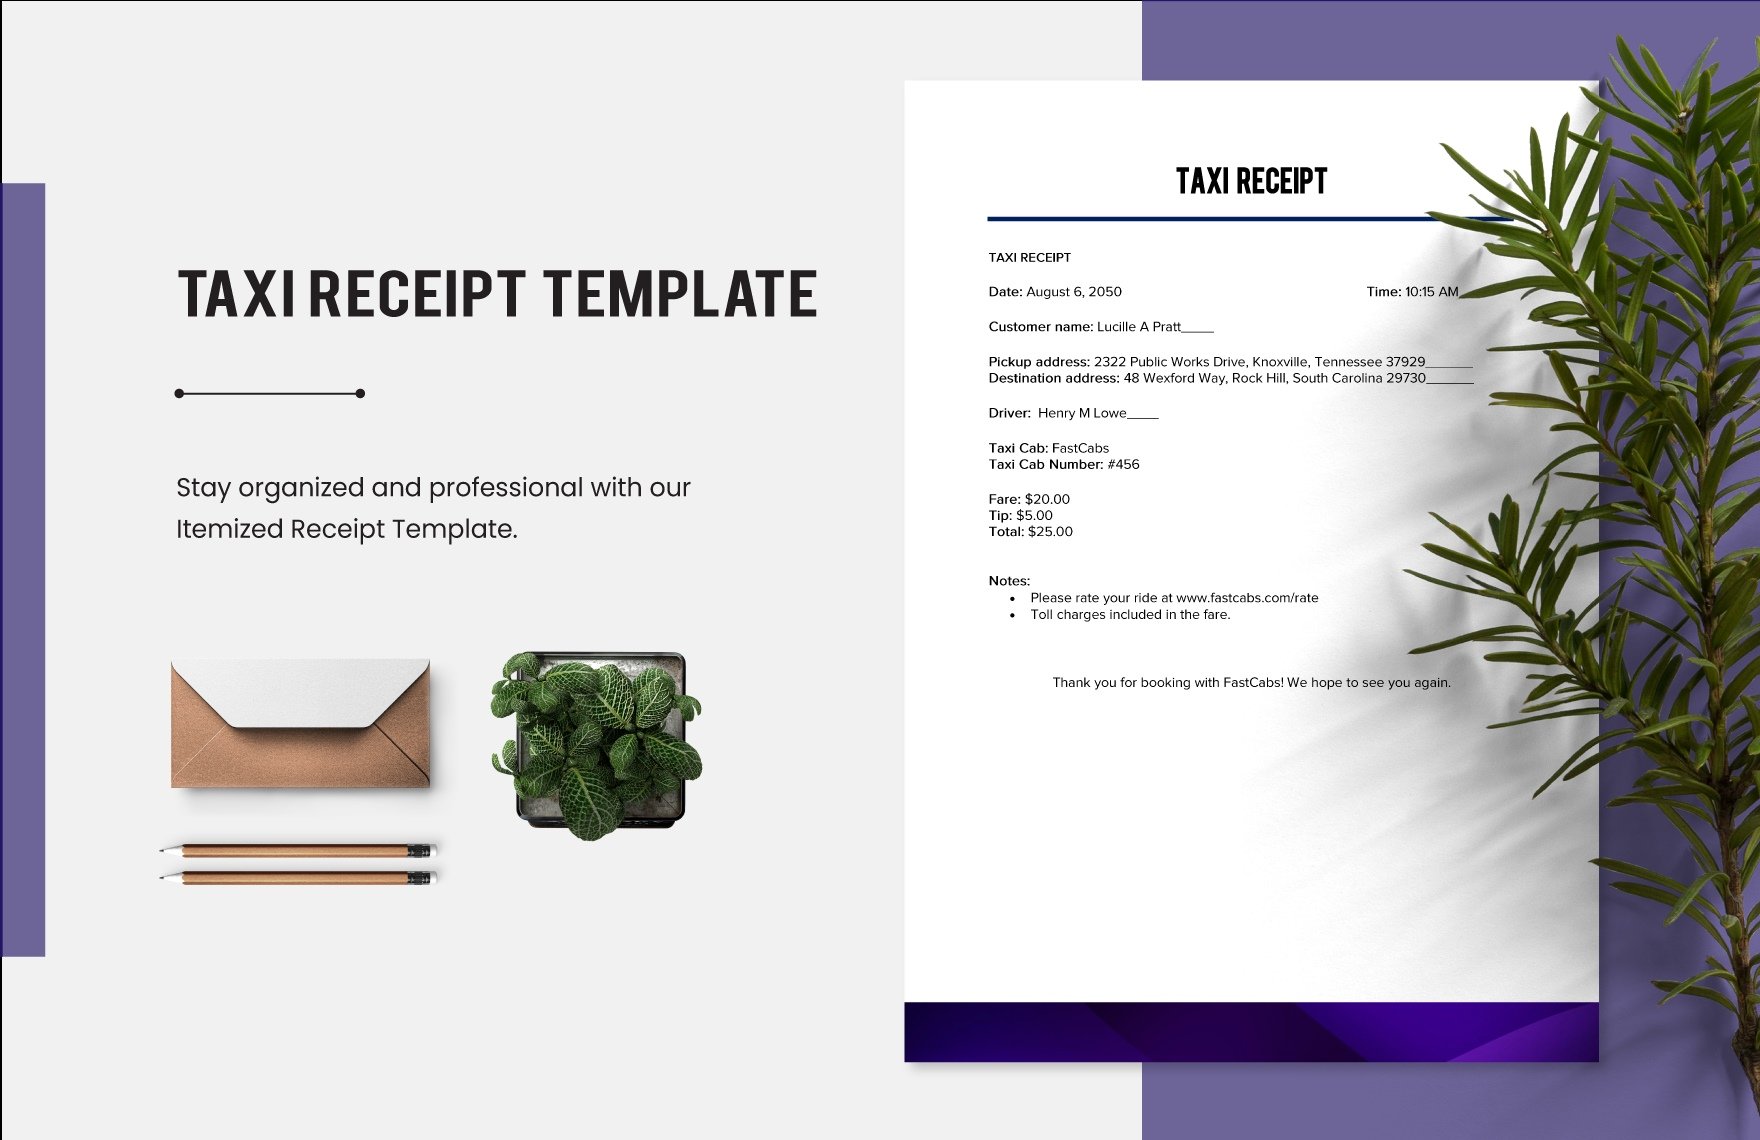 Taxi Receipt Template in Word, Google Docs, PDF, Apple Pages